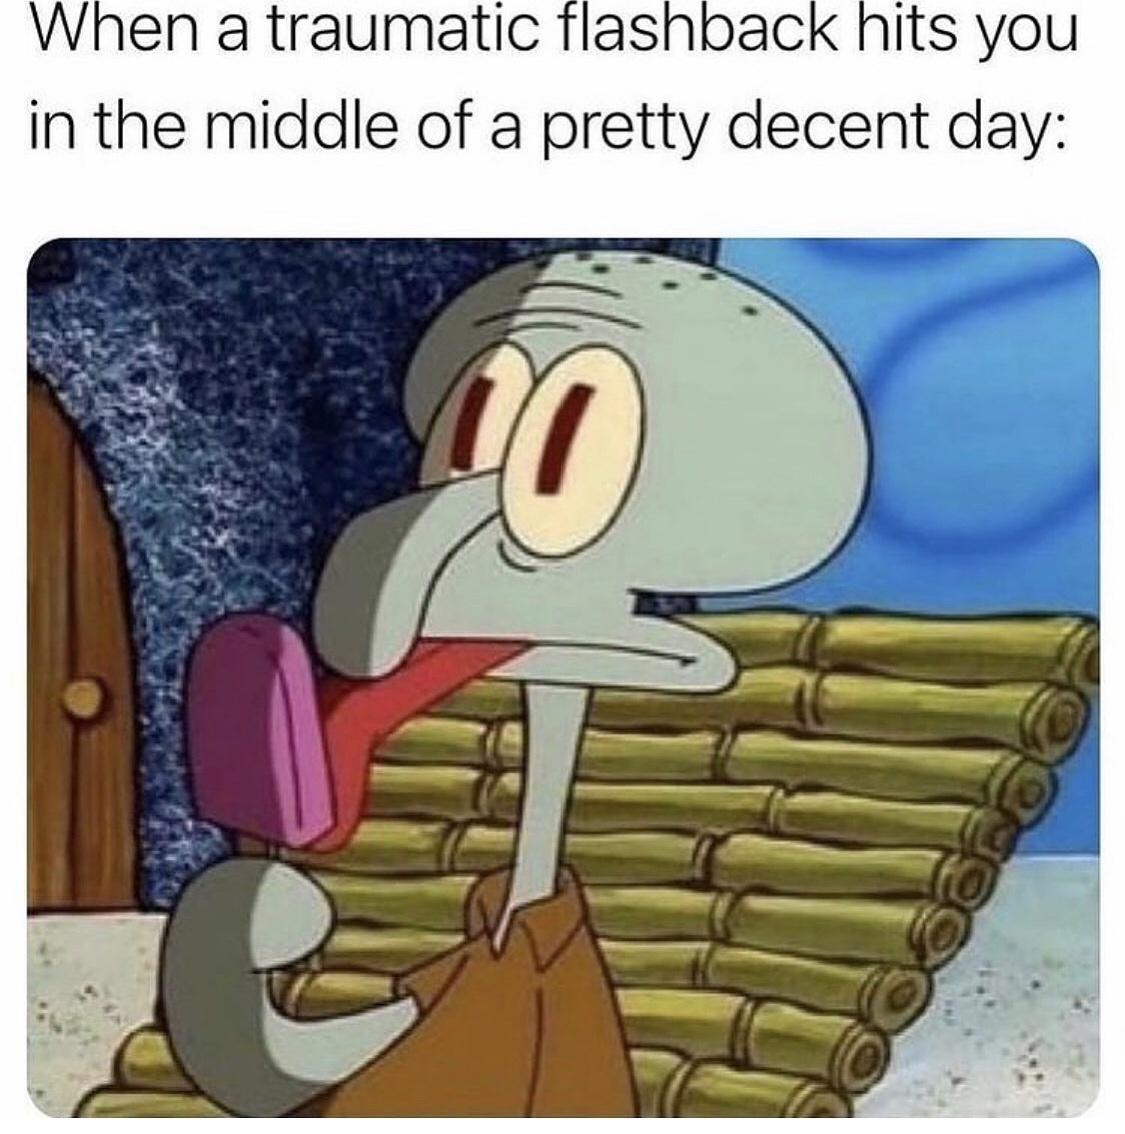 funny gaming memes - traumatic flashback hits you - When a traumatic flashback hits you in the middle of a pretty decent day 10